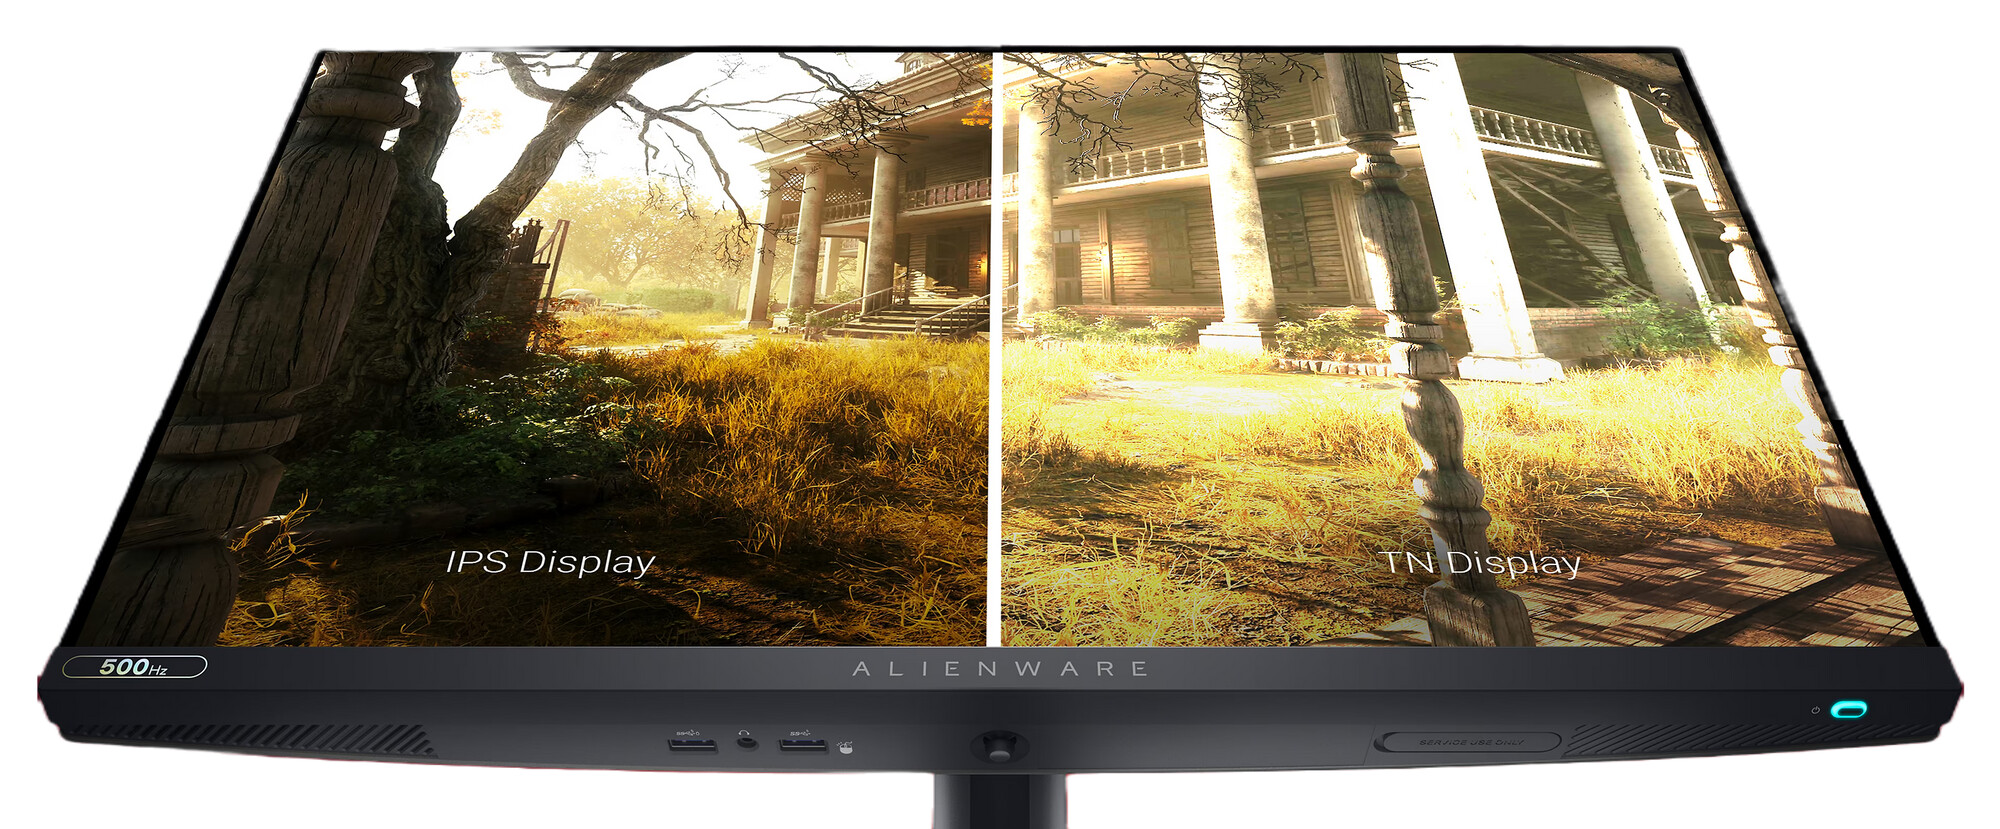 Grab the Alienware 25 monitor with a crazy 360Hz refresh rate at